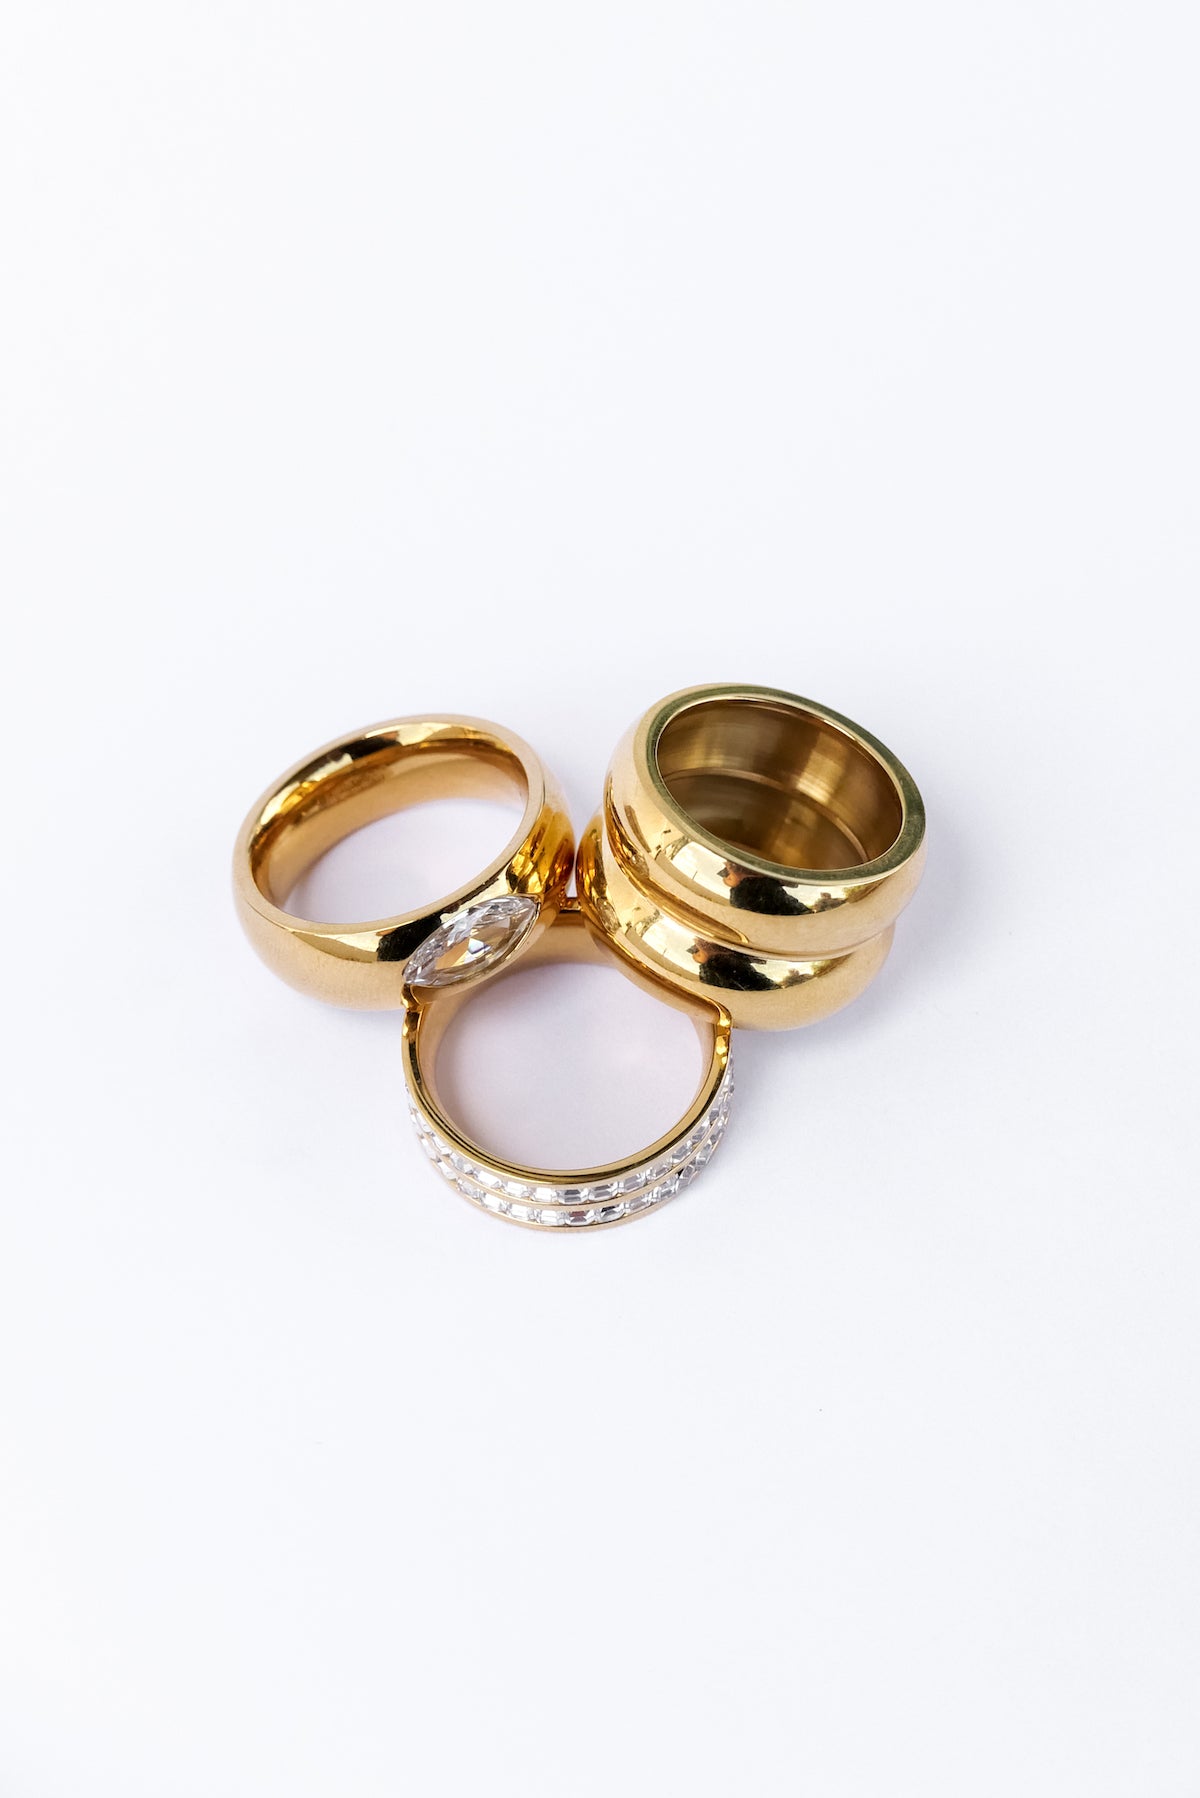 From Left to right: Spotlight ring, Be extra ring and goals ring stacked on a white backdrop